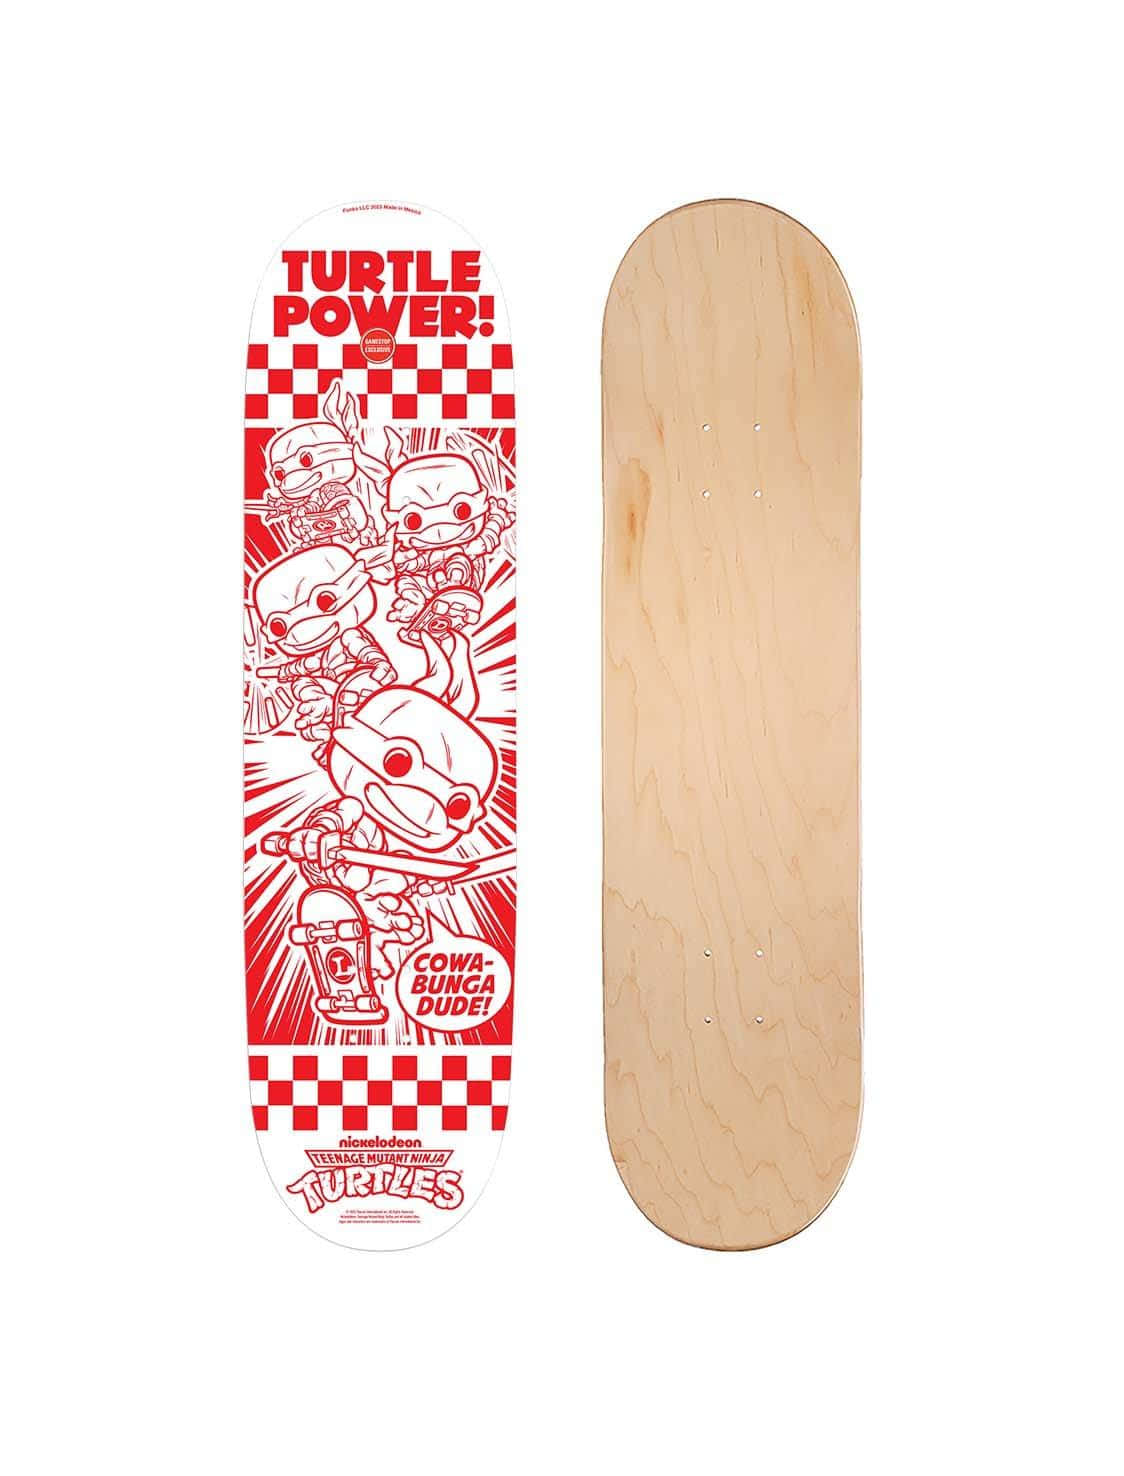 A Skateboard With A Turtle Power Design On It